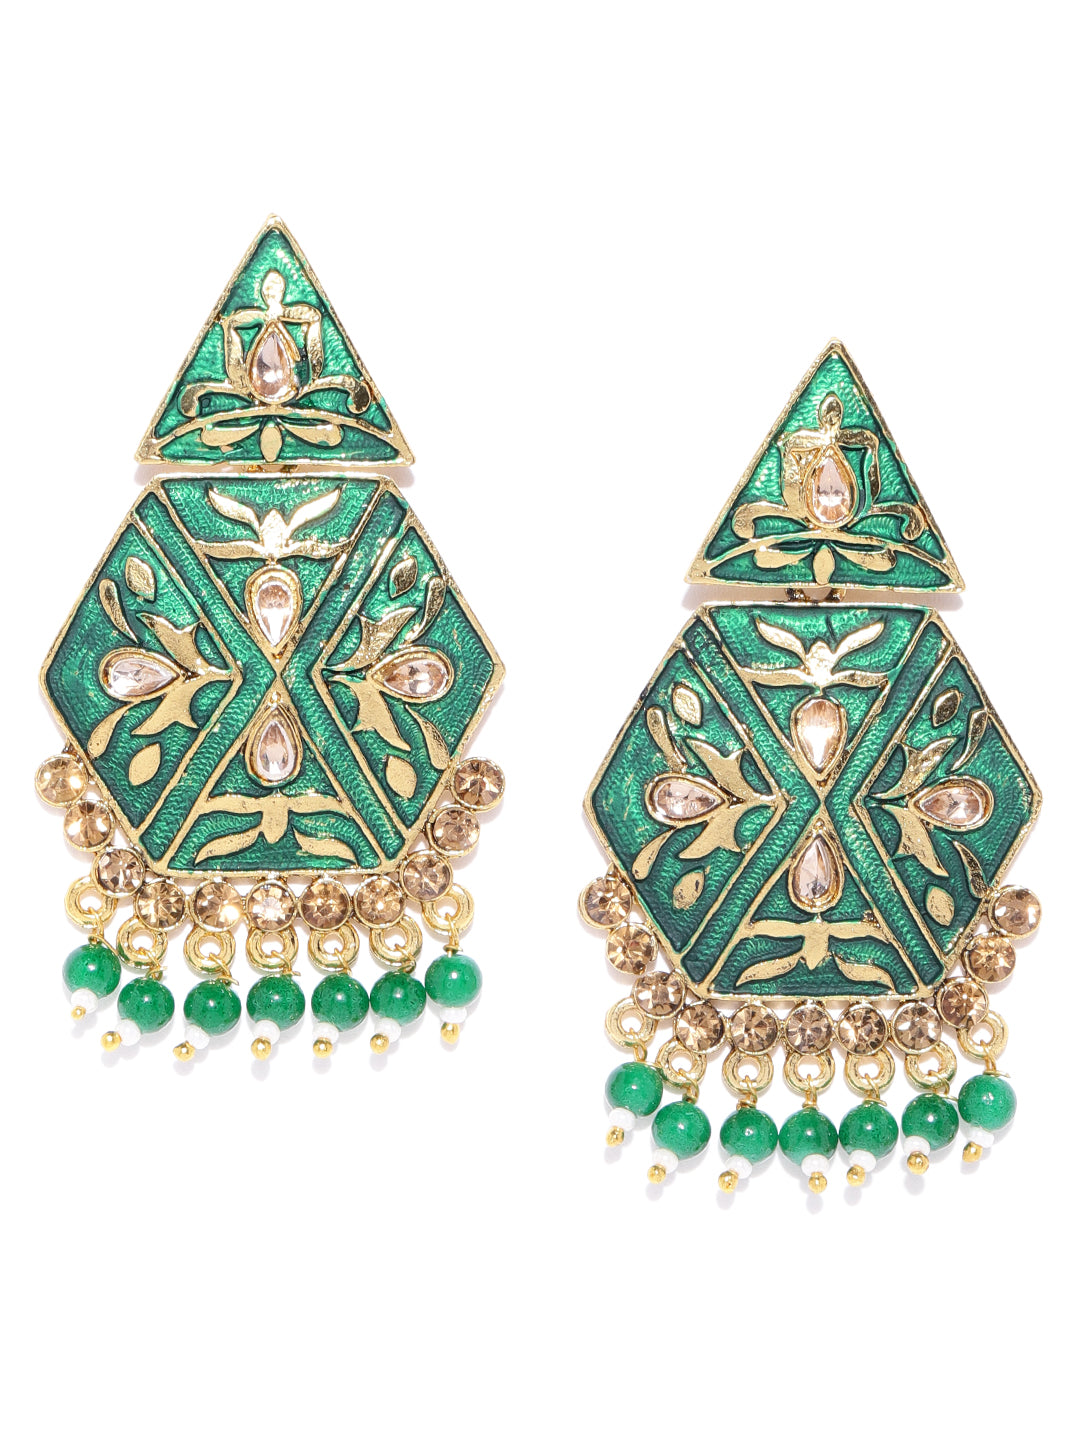 Gold-Plated Stone Studded, Geometric Inspired Drop Earrings with Beads Drop in Green Color